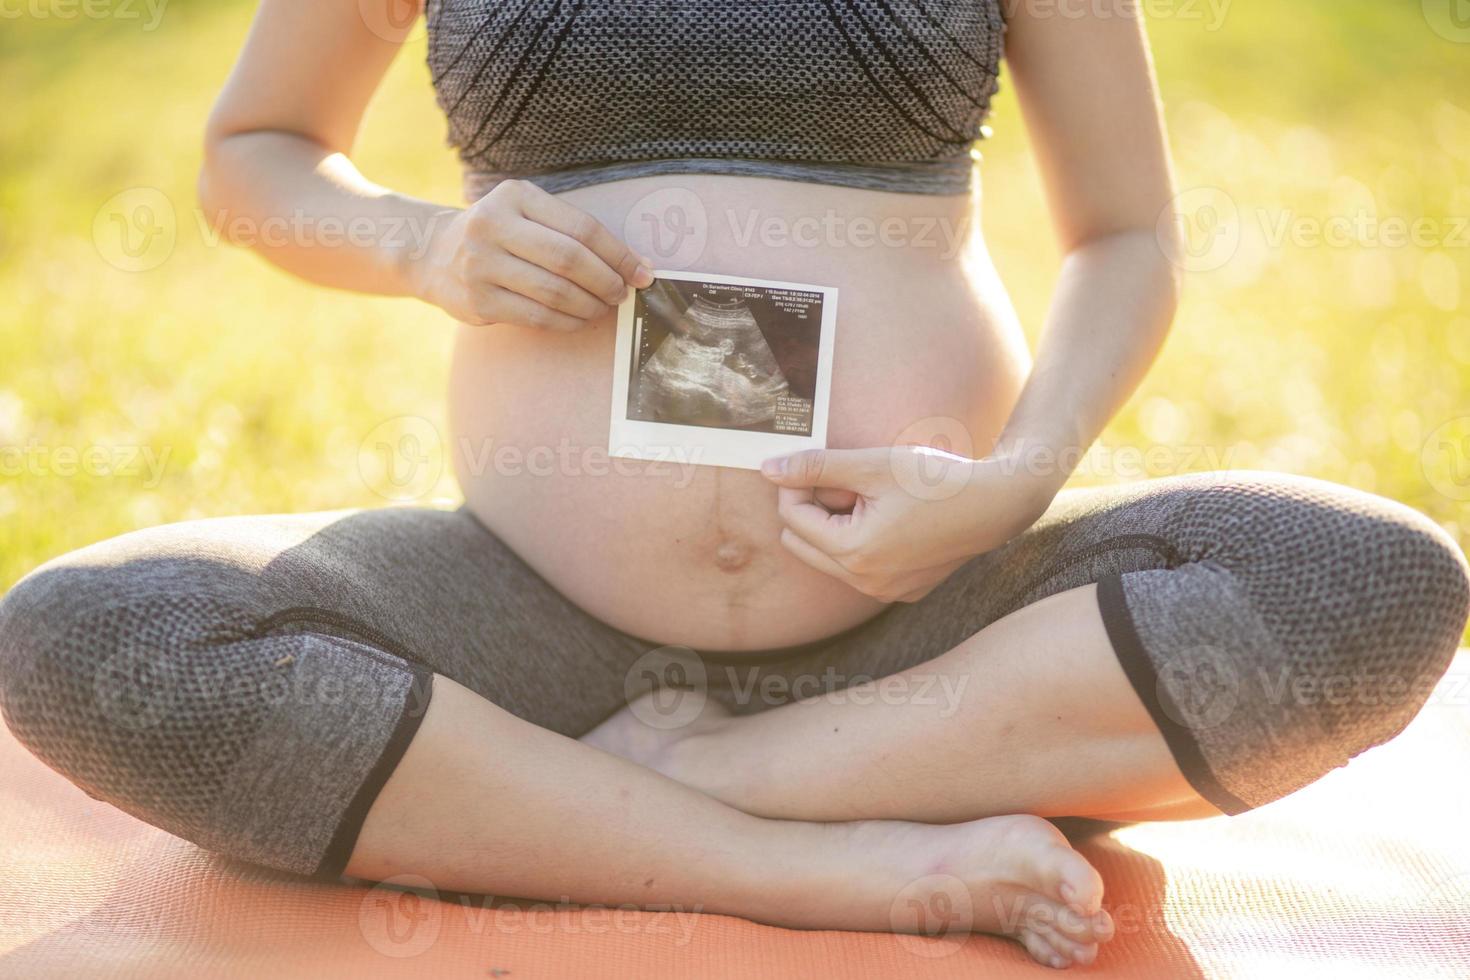 Pregnant woman holding ultrasound photo near her pregnant belly